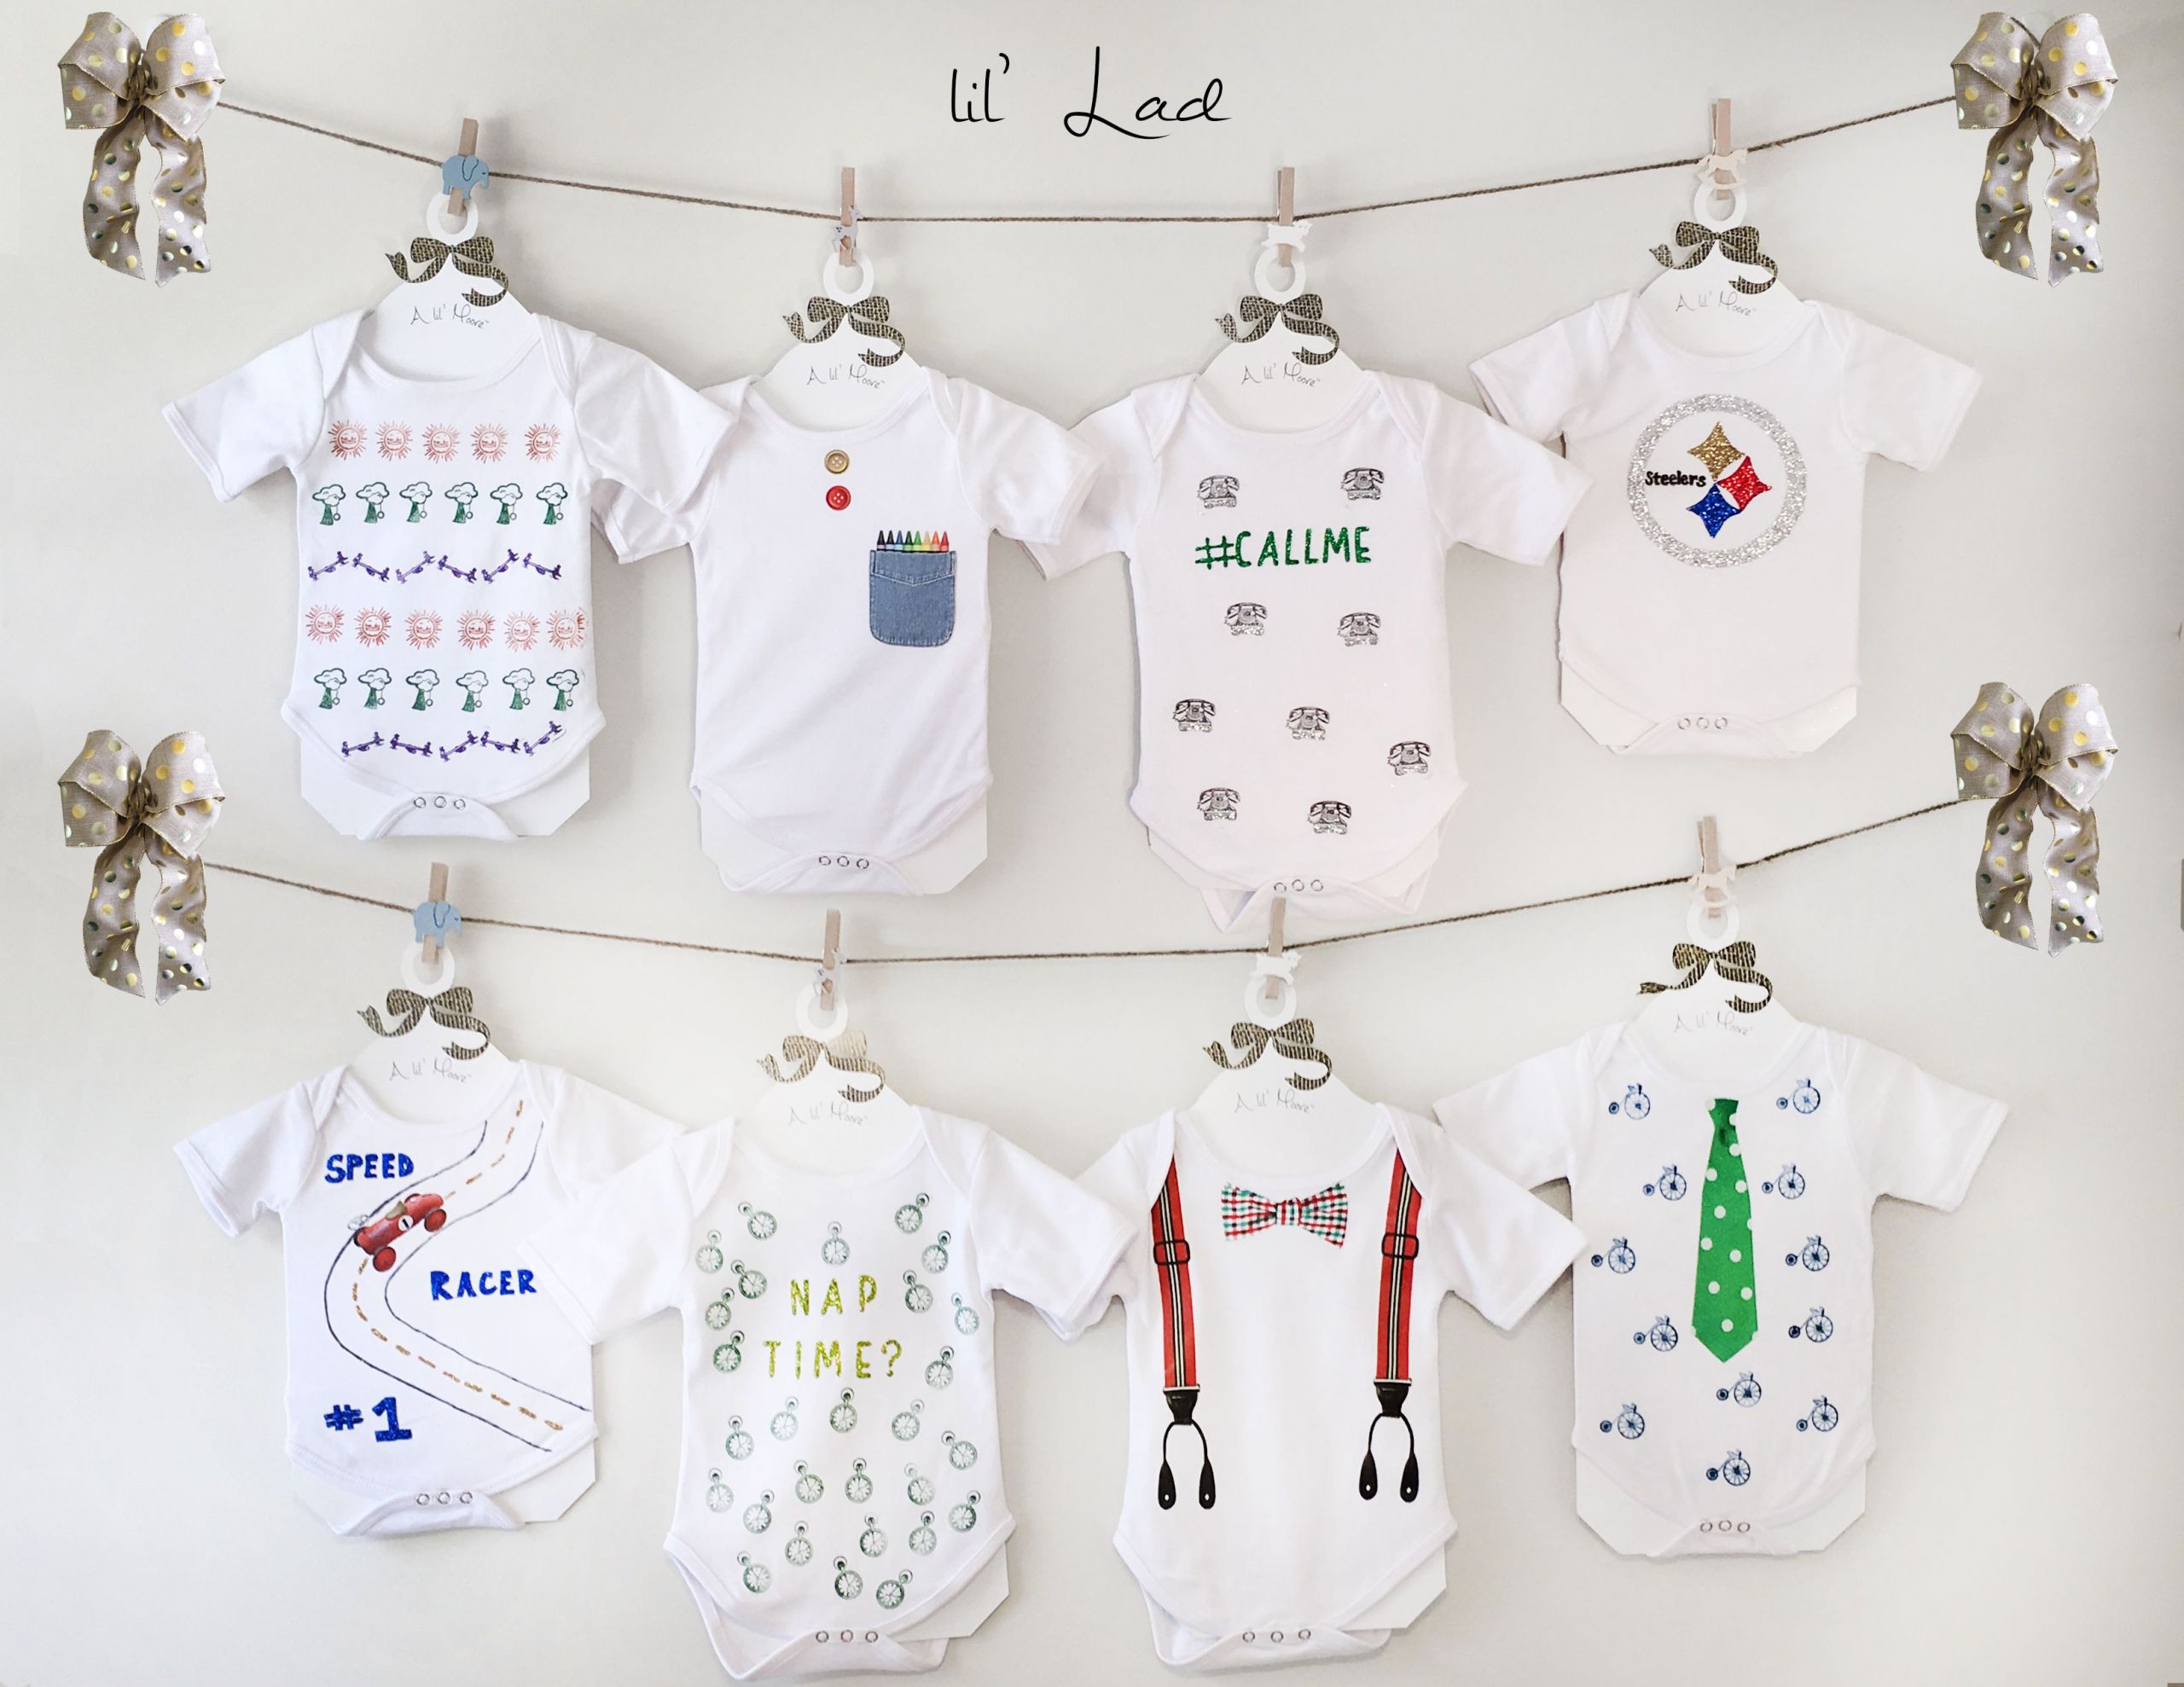 Baby Onesie Ideas For Decorating
 The Ultimate Baby Shower Gift A onesie decorating kit for